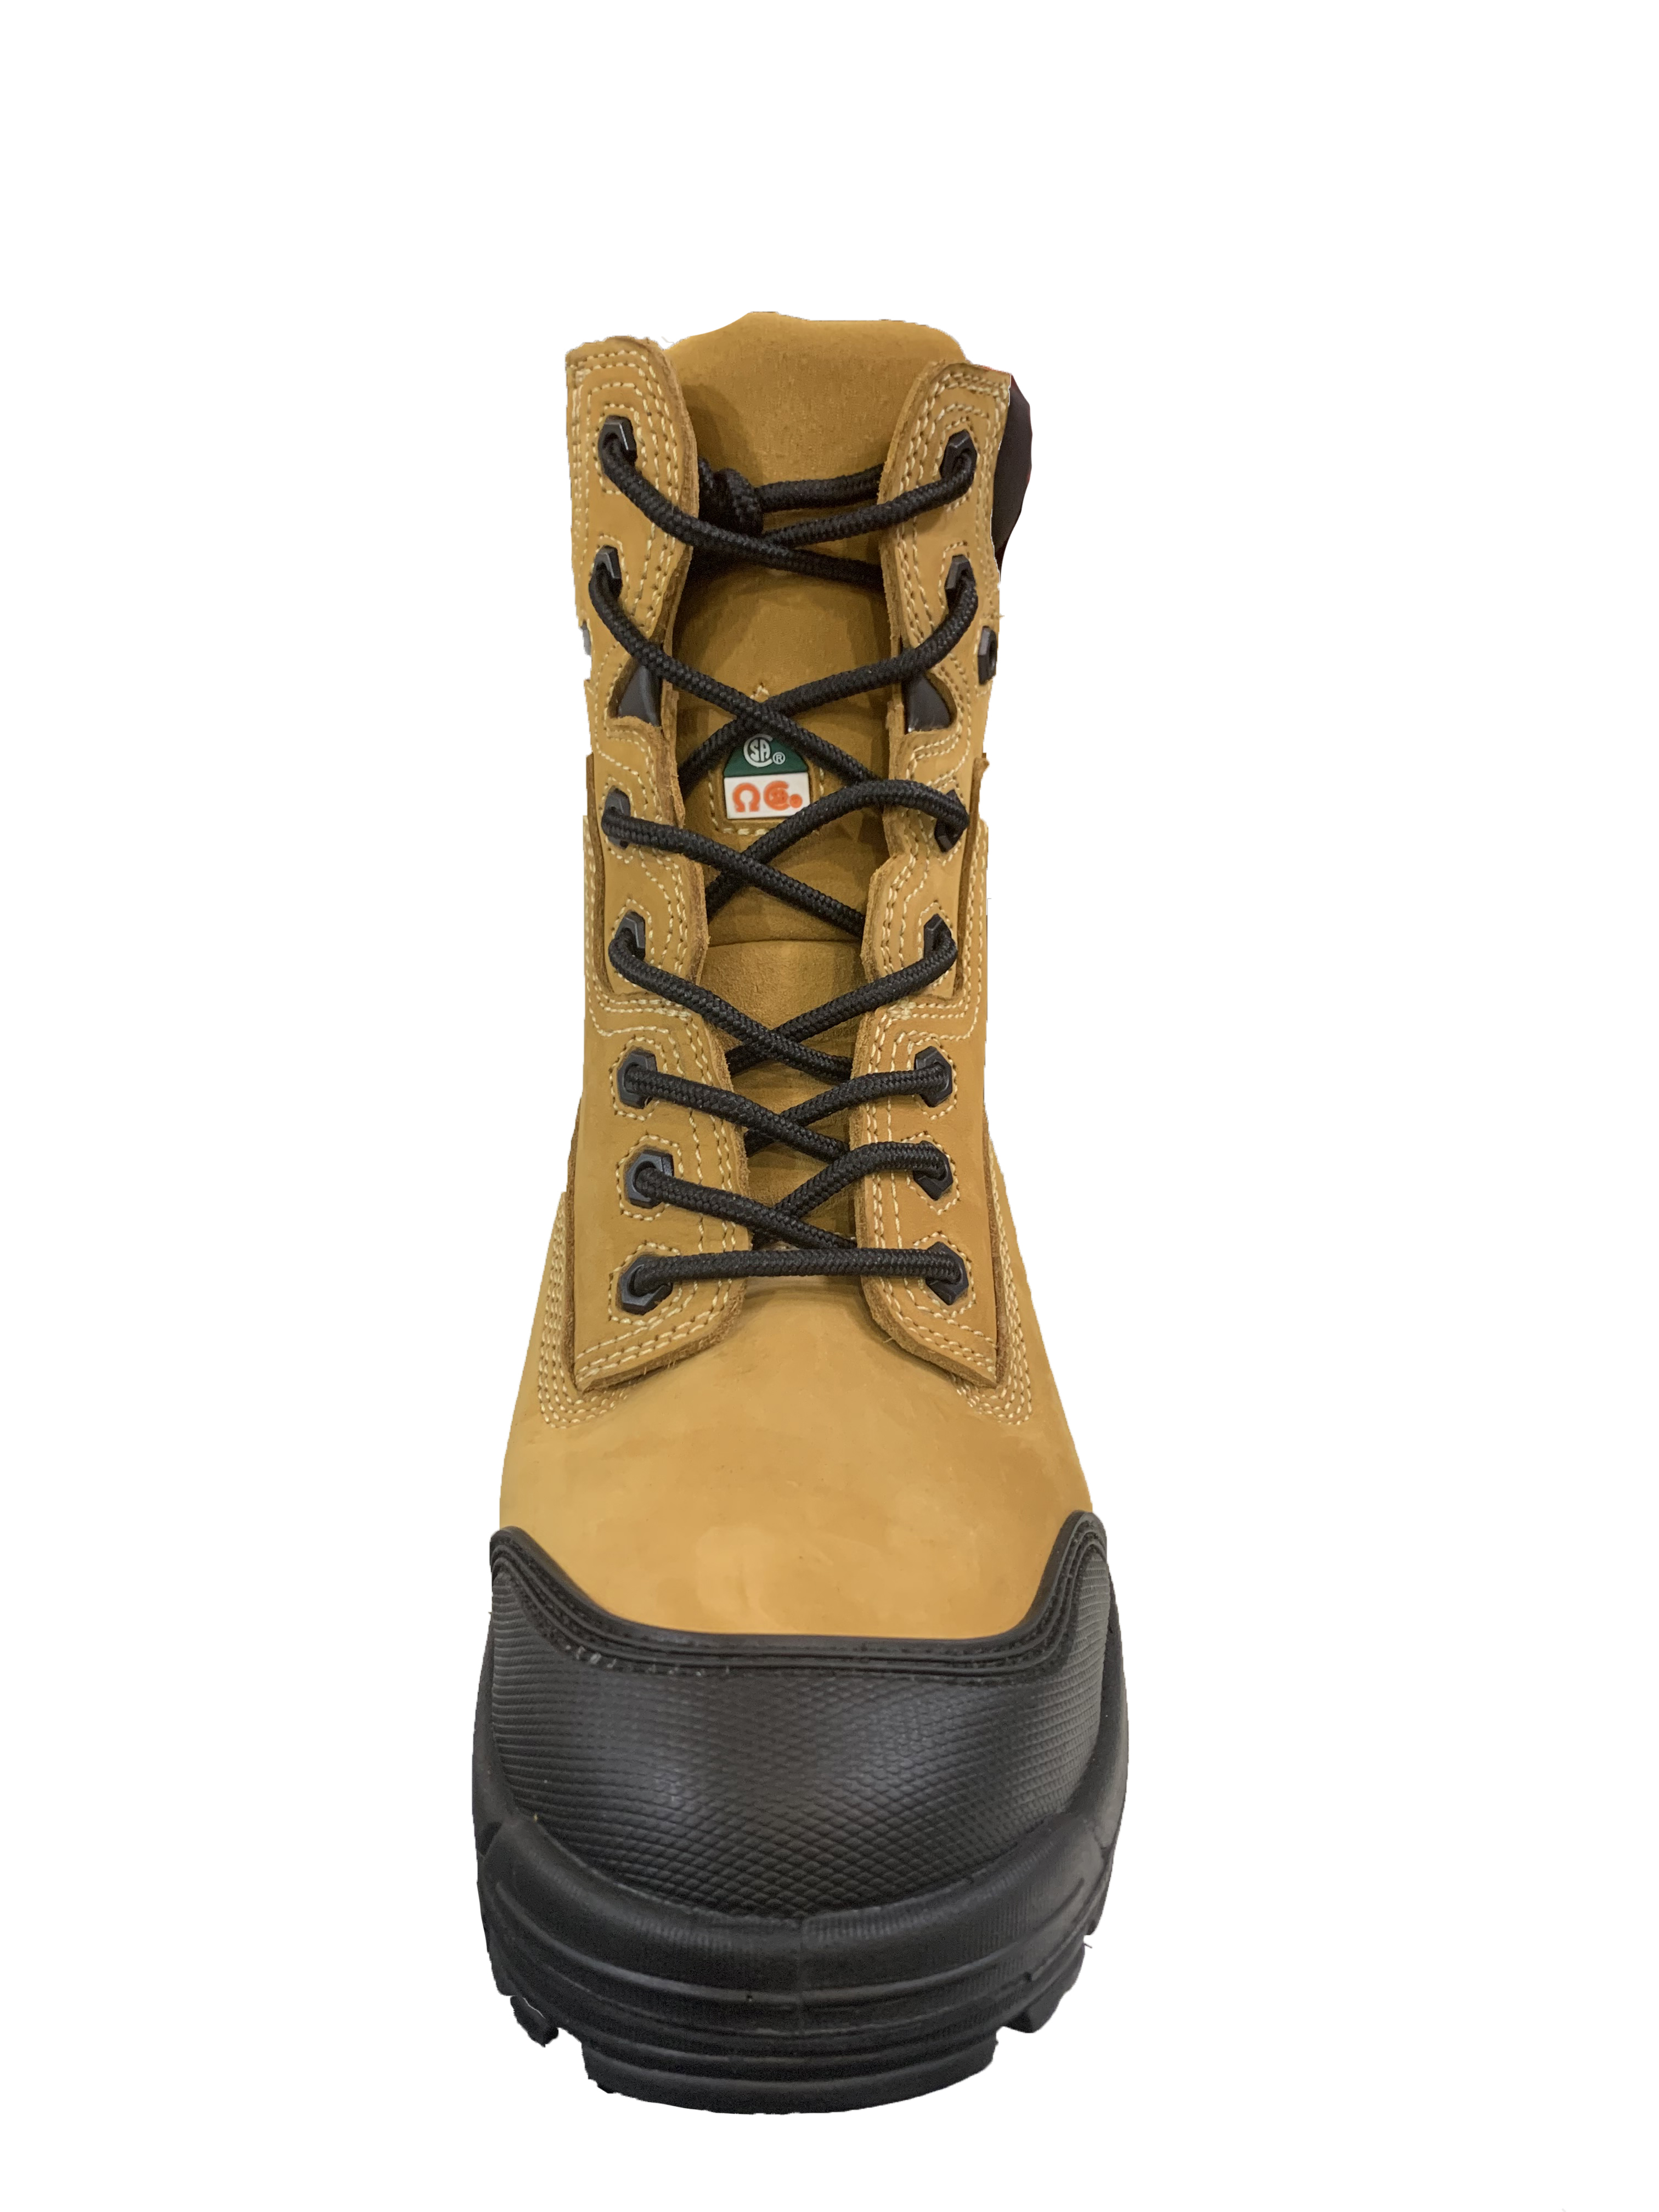 Lace up 8'' Dogwood steel toe safety boot CSA standard 